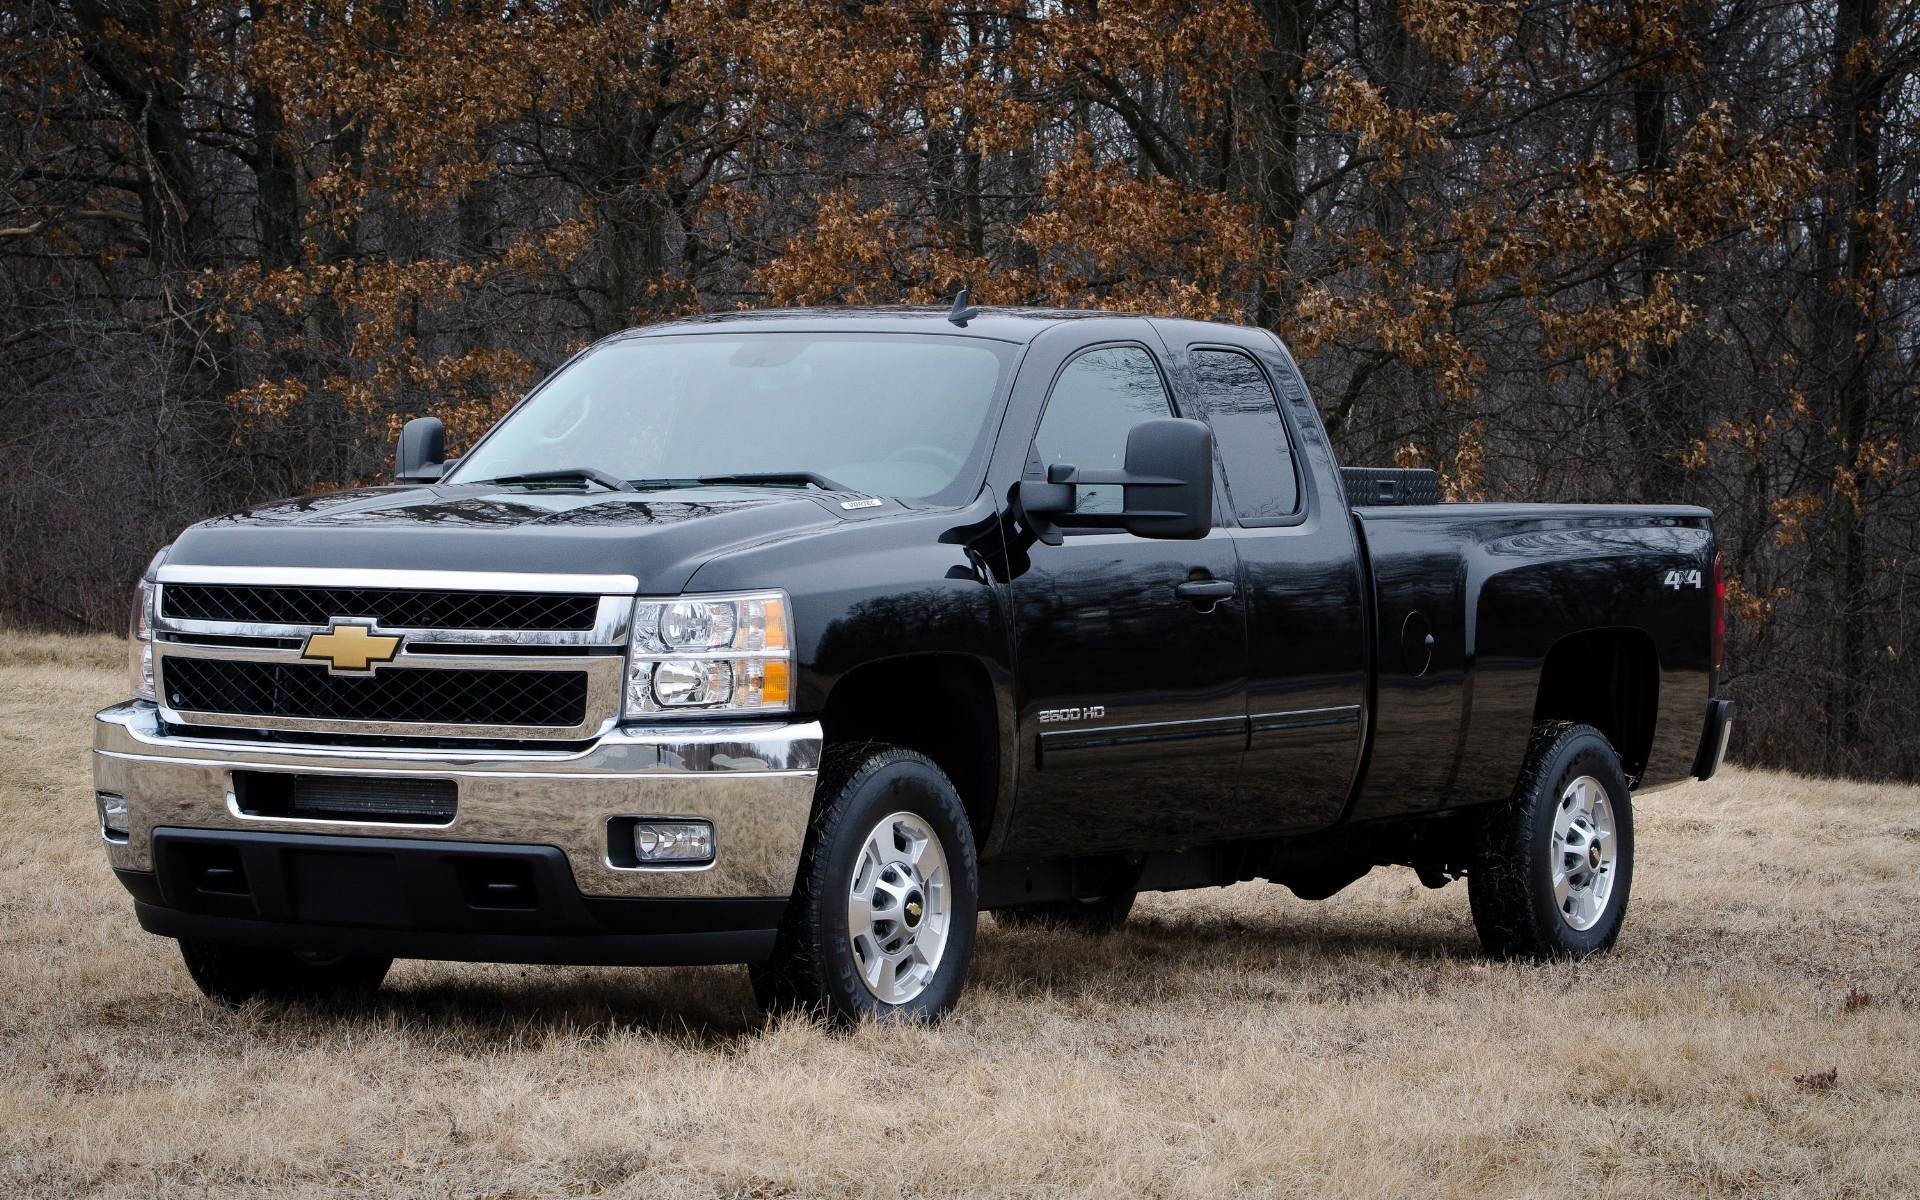 1920x1200 2013 Chevrolet Silverado Wallpapers | High Quality Wallpapers